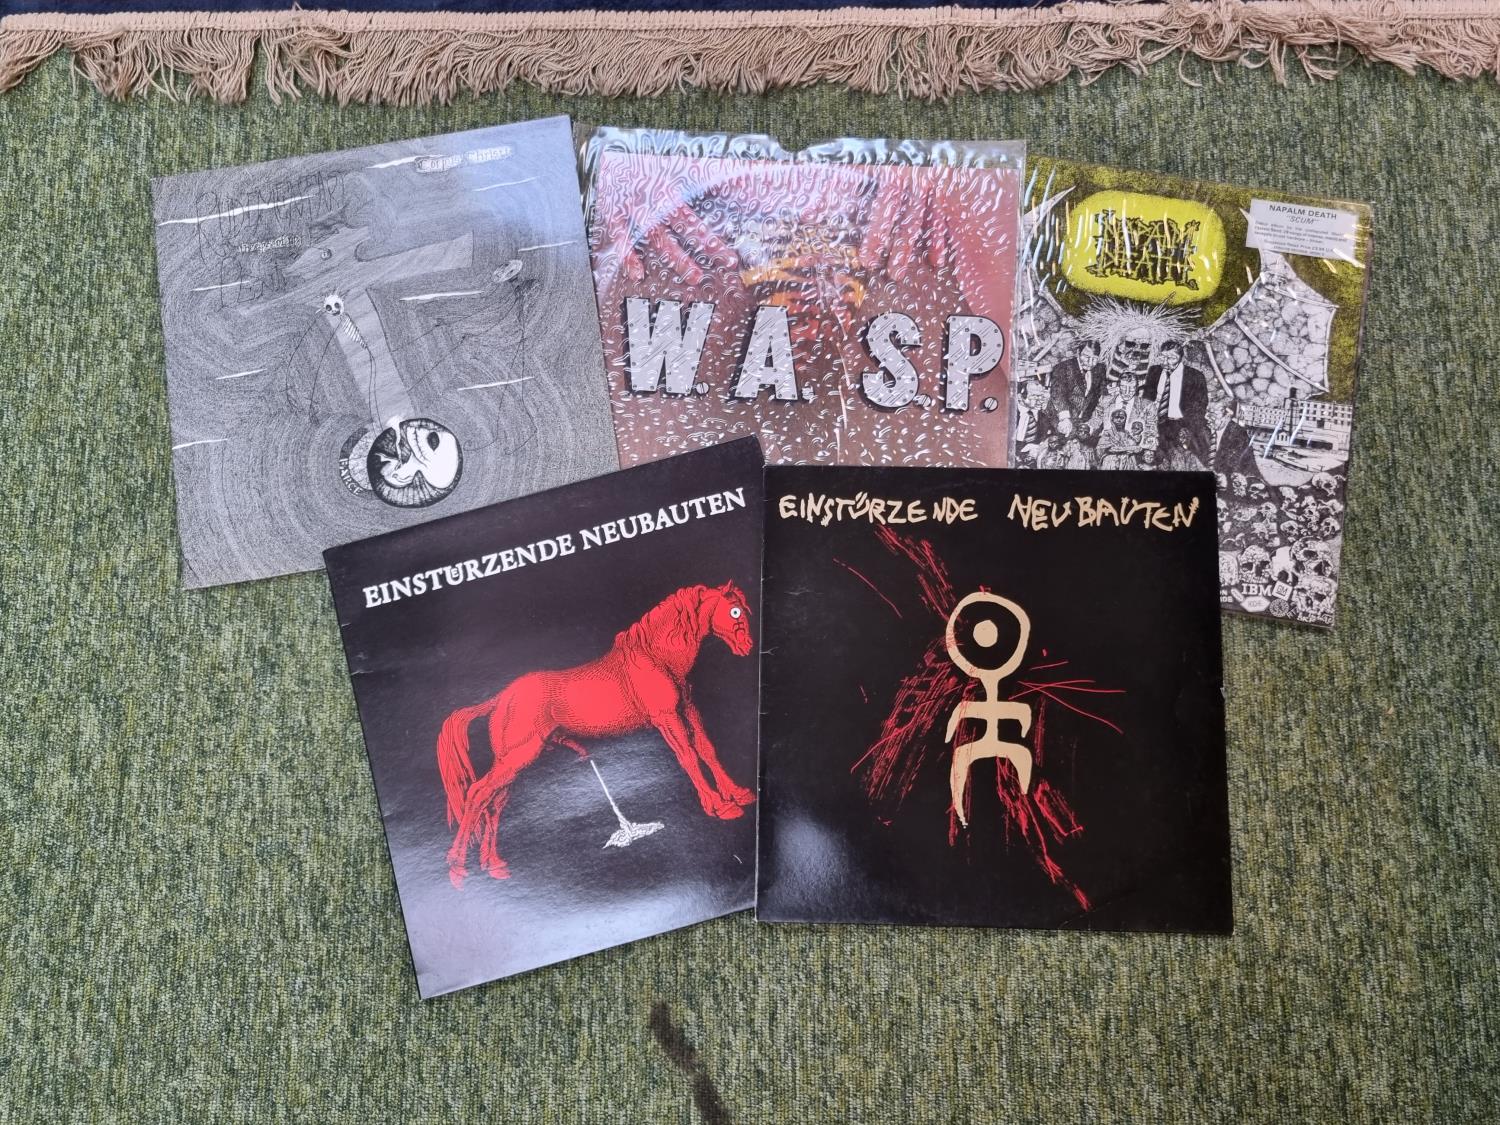 Collection of Heavy Rock Vinyl Records to include Napalm Death, WASP etc (5)